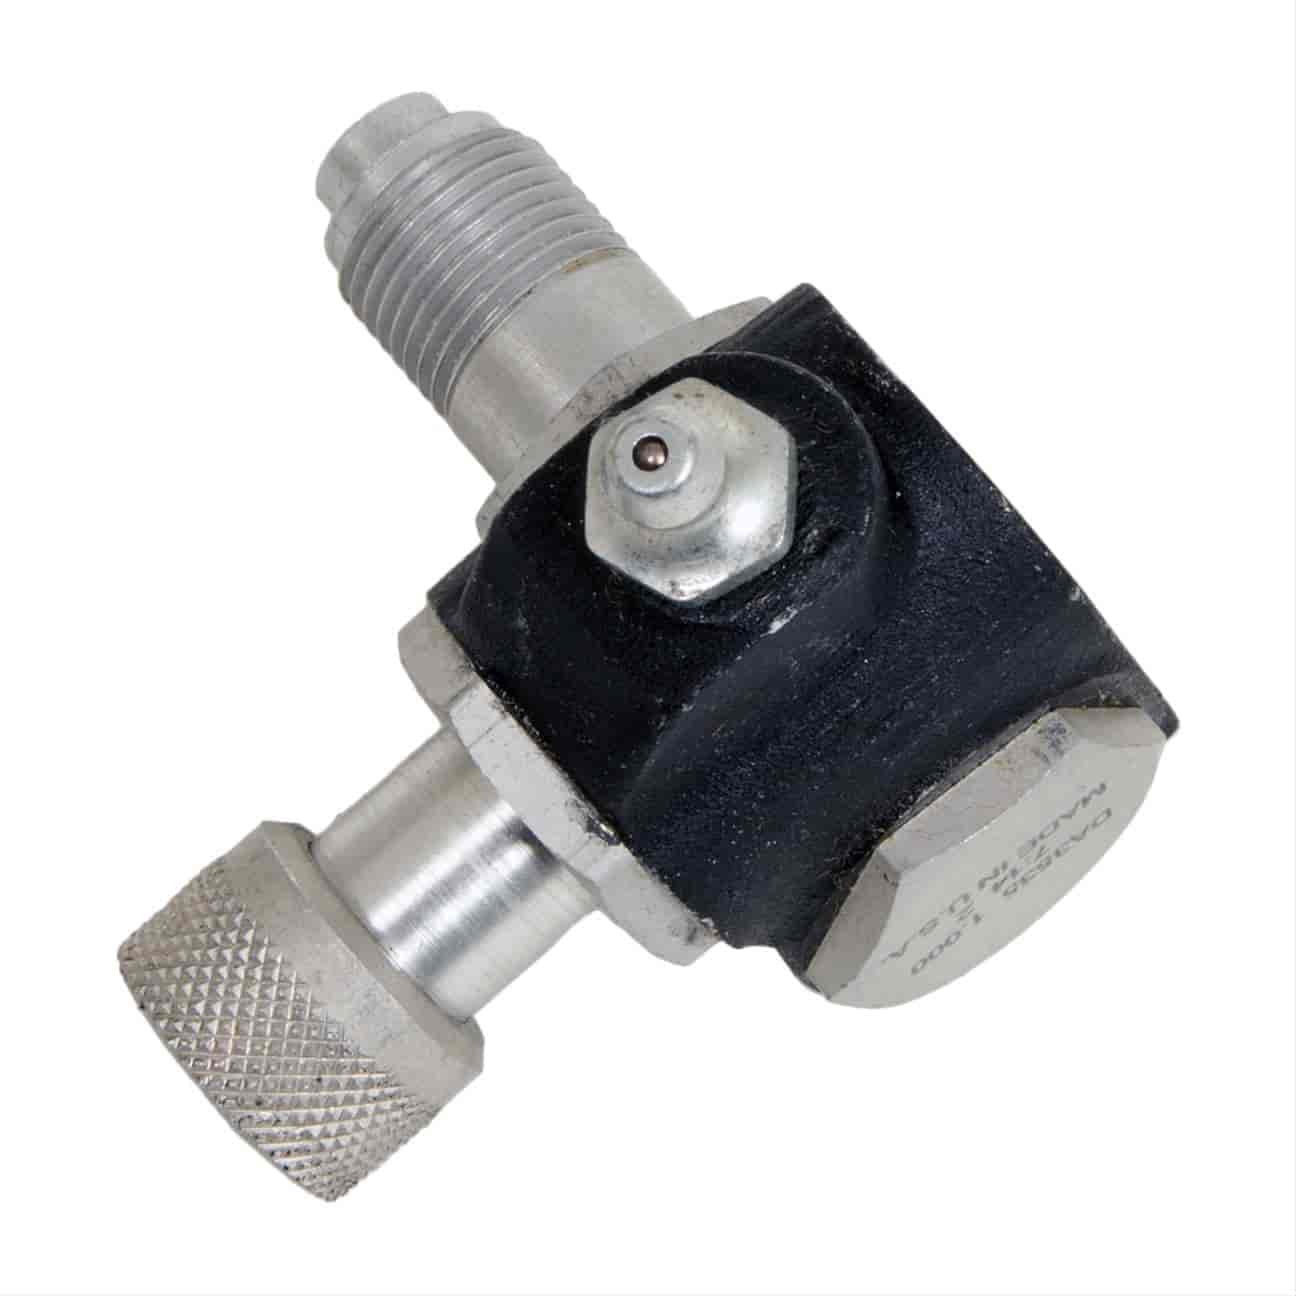 Speedometer Cable Sender Adapter [90-Degree Angle]